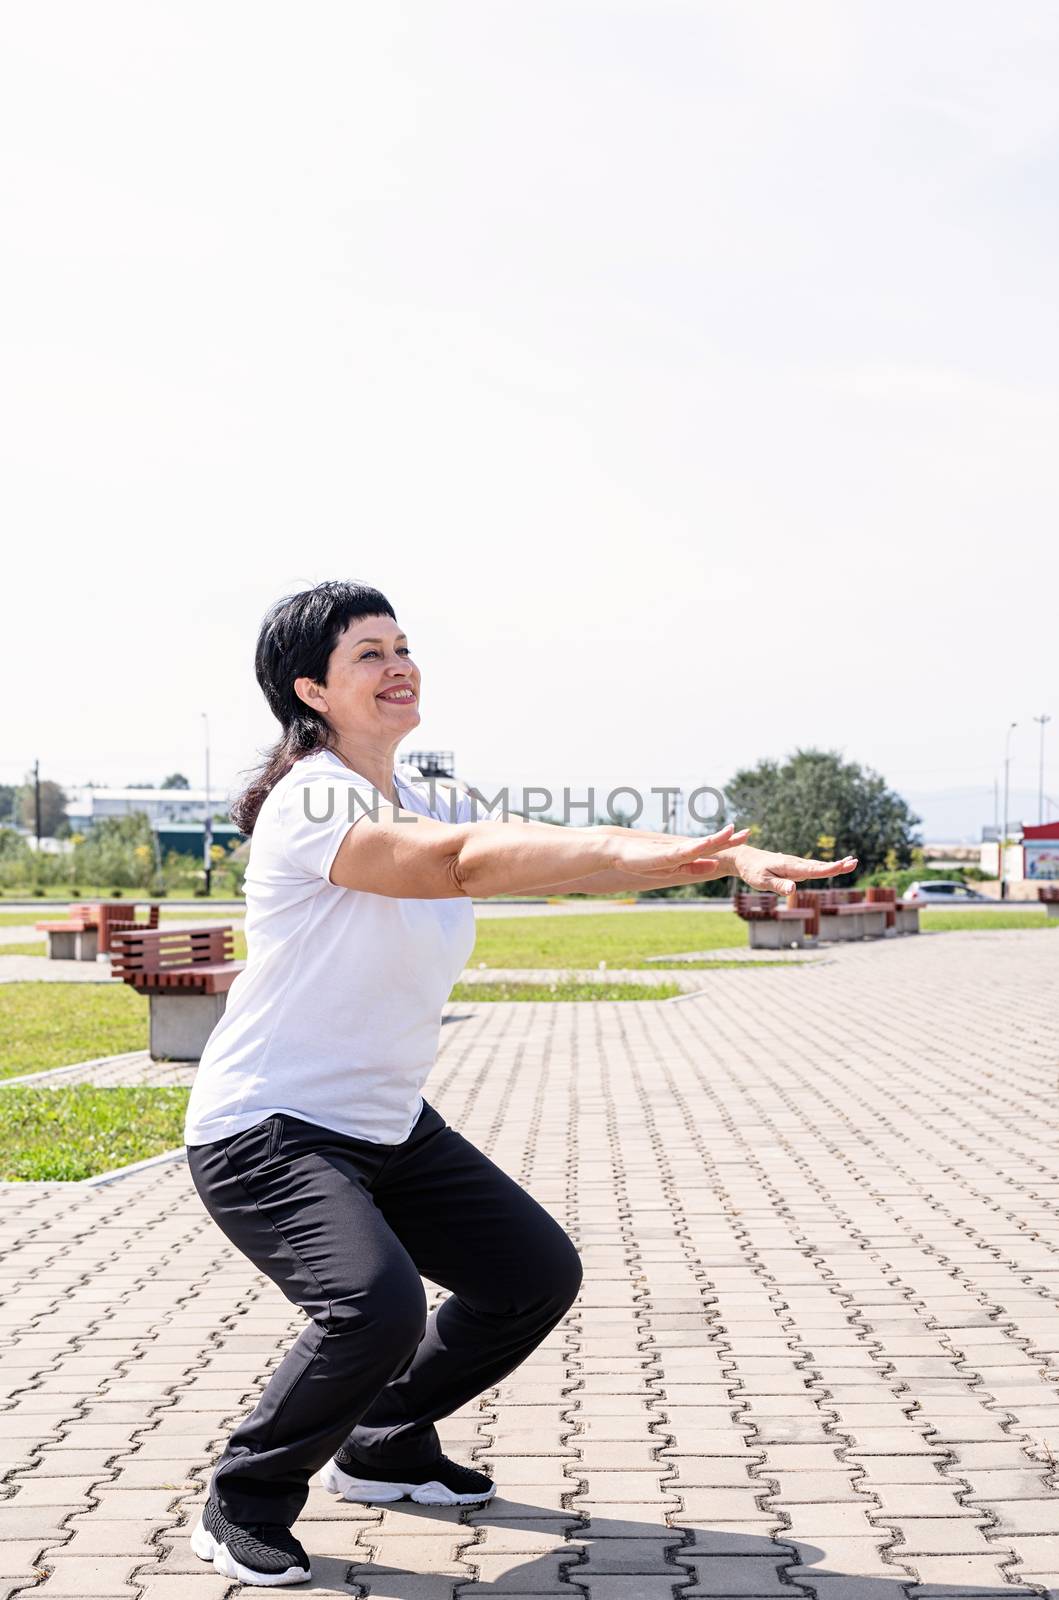 Smiling senior woman squatting outdoors in the park by Desperada